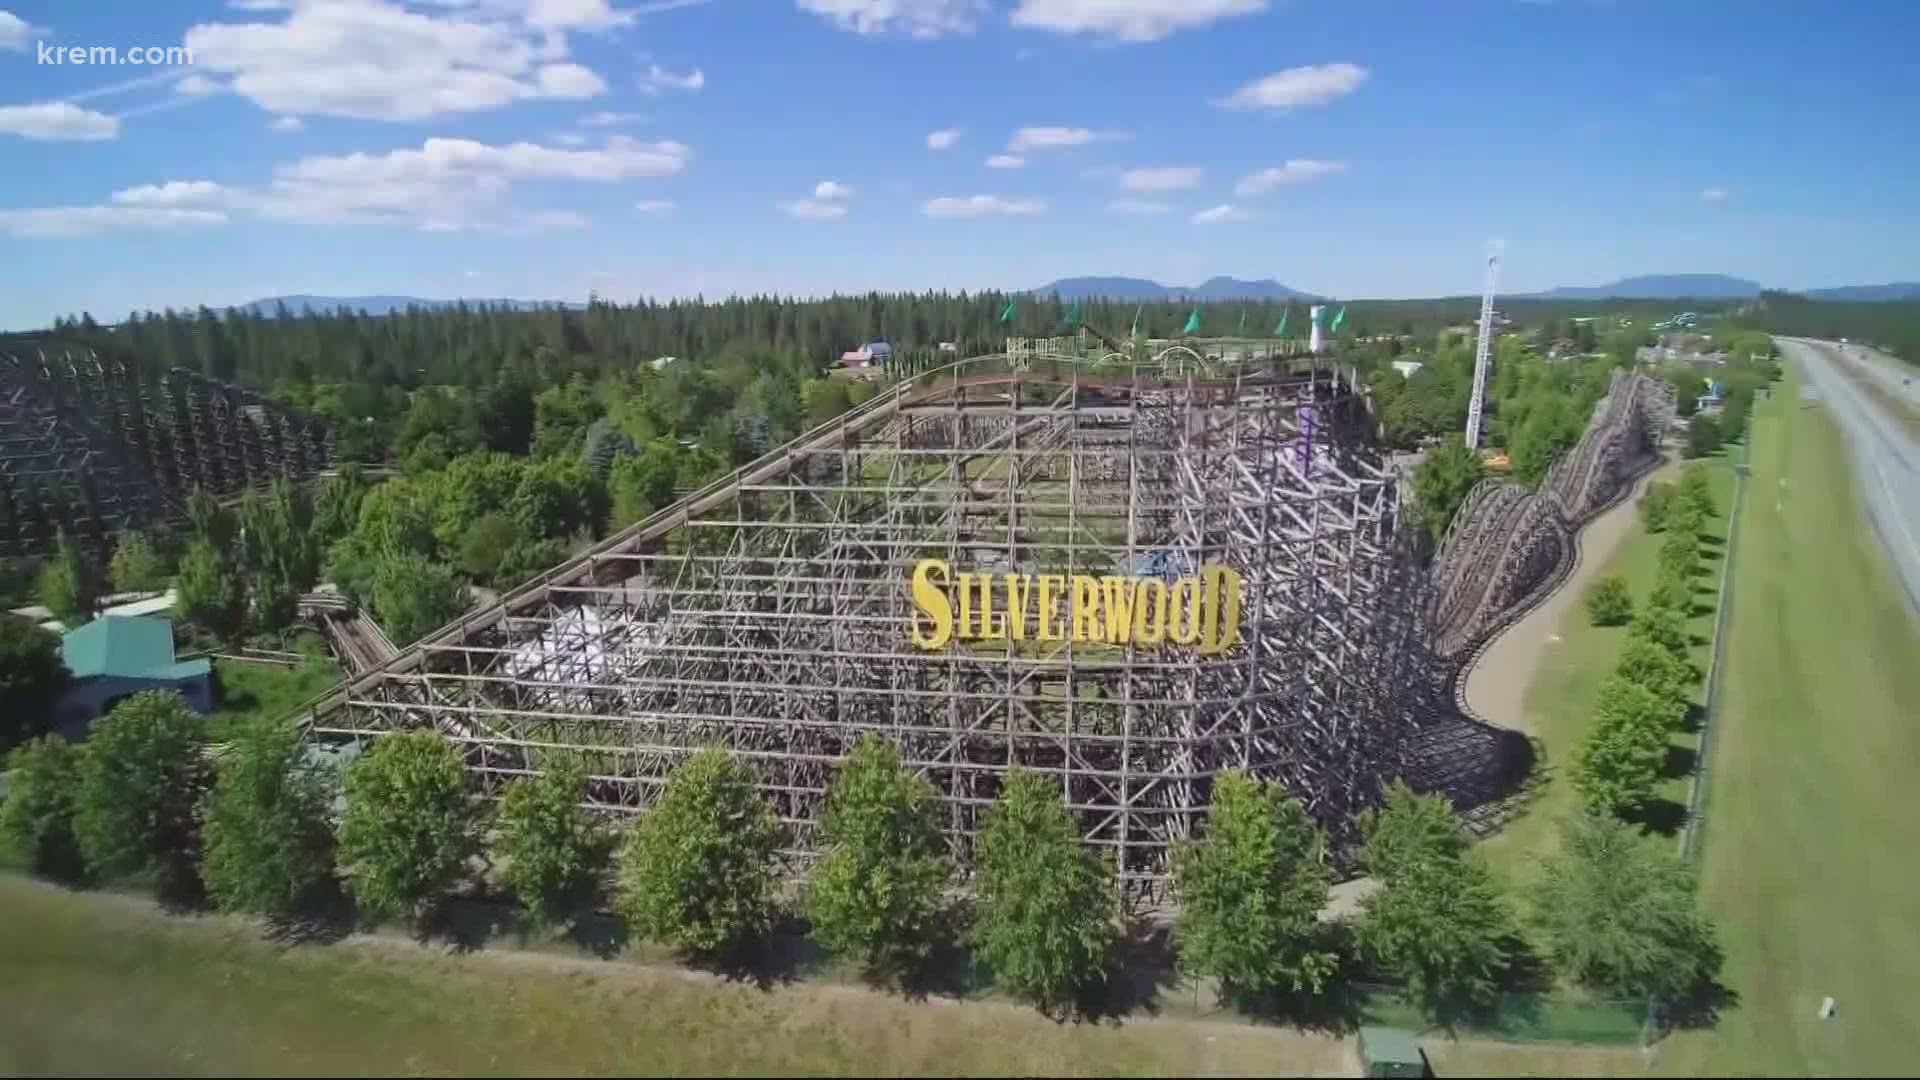 Authorities from the Kootenai County Sheriff's Office responded to a report of a wooden roller coaster on fire at 1:30 a.m. Saturday.